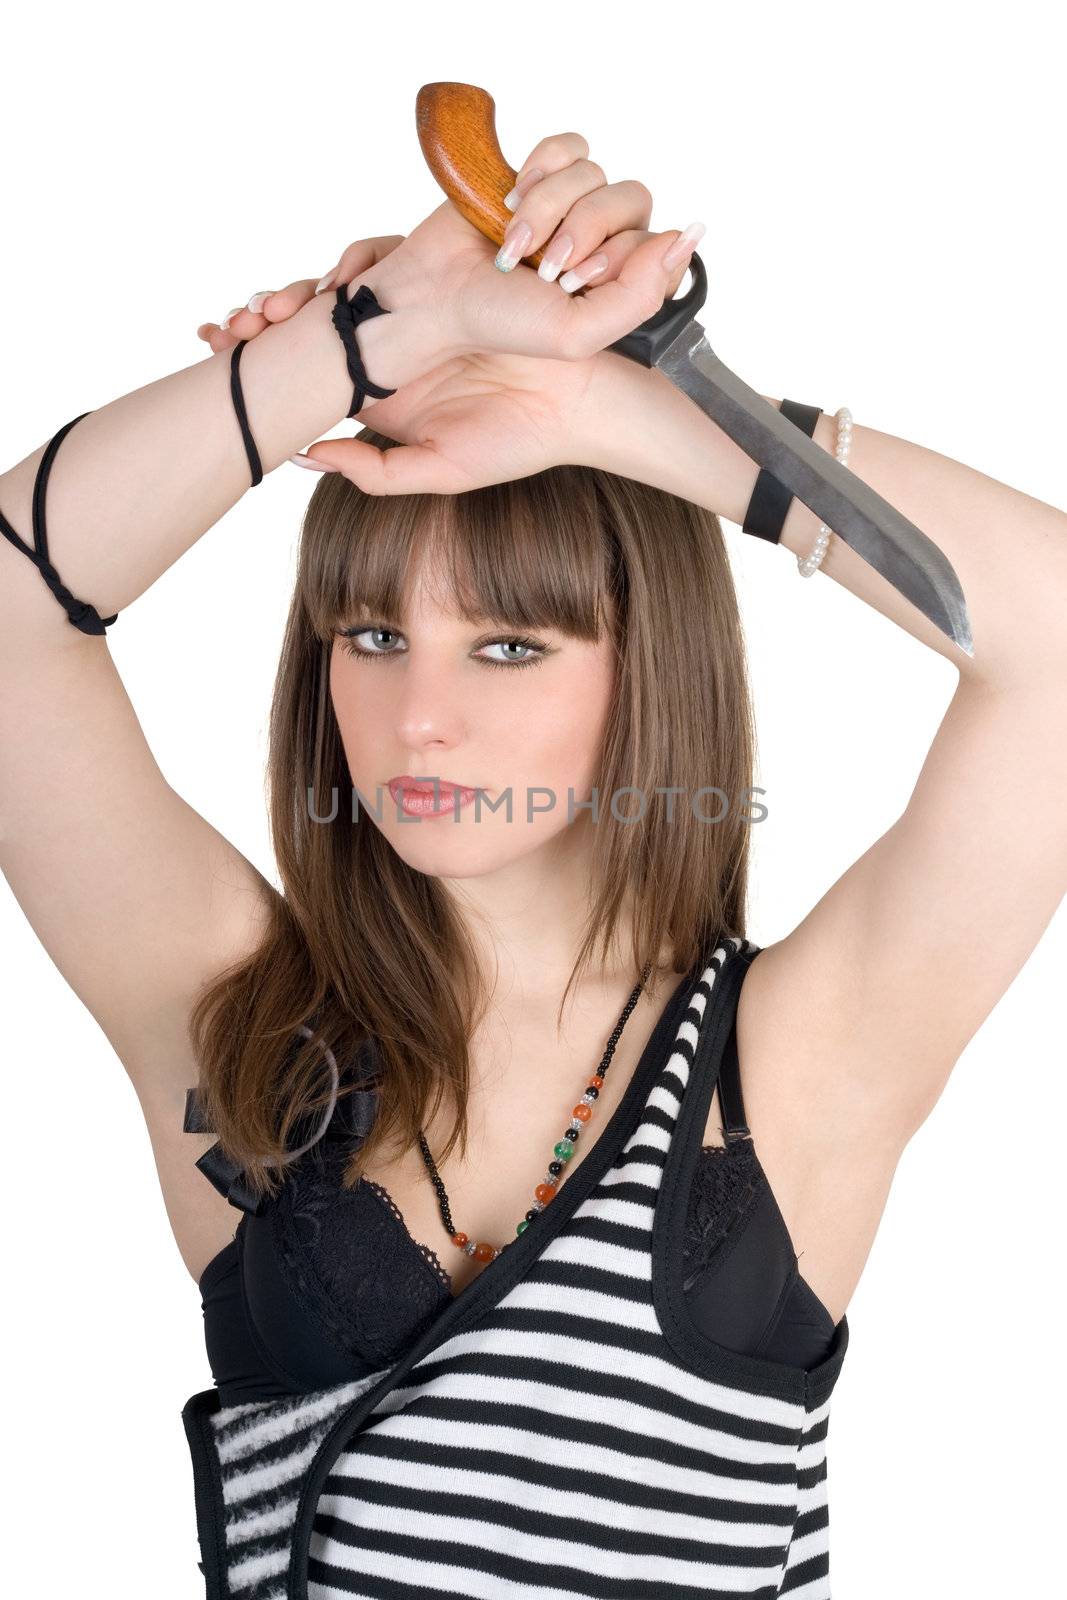 Pretty girl in a striped dress with a knife